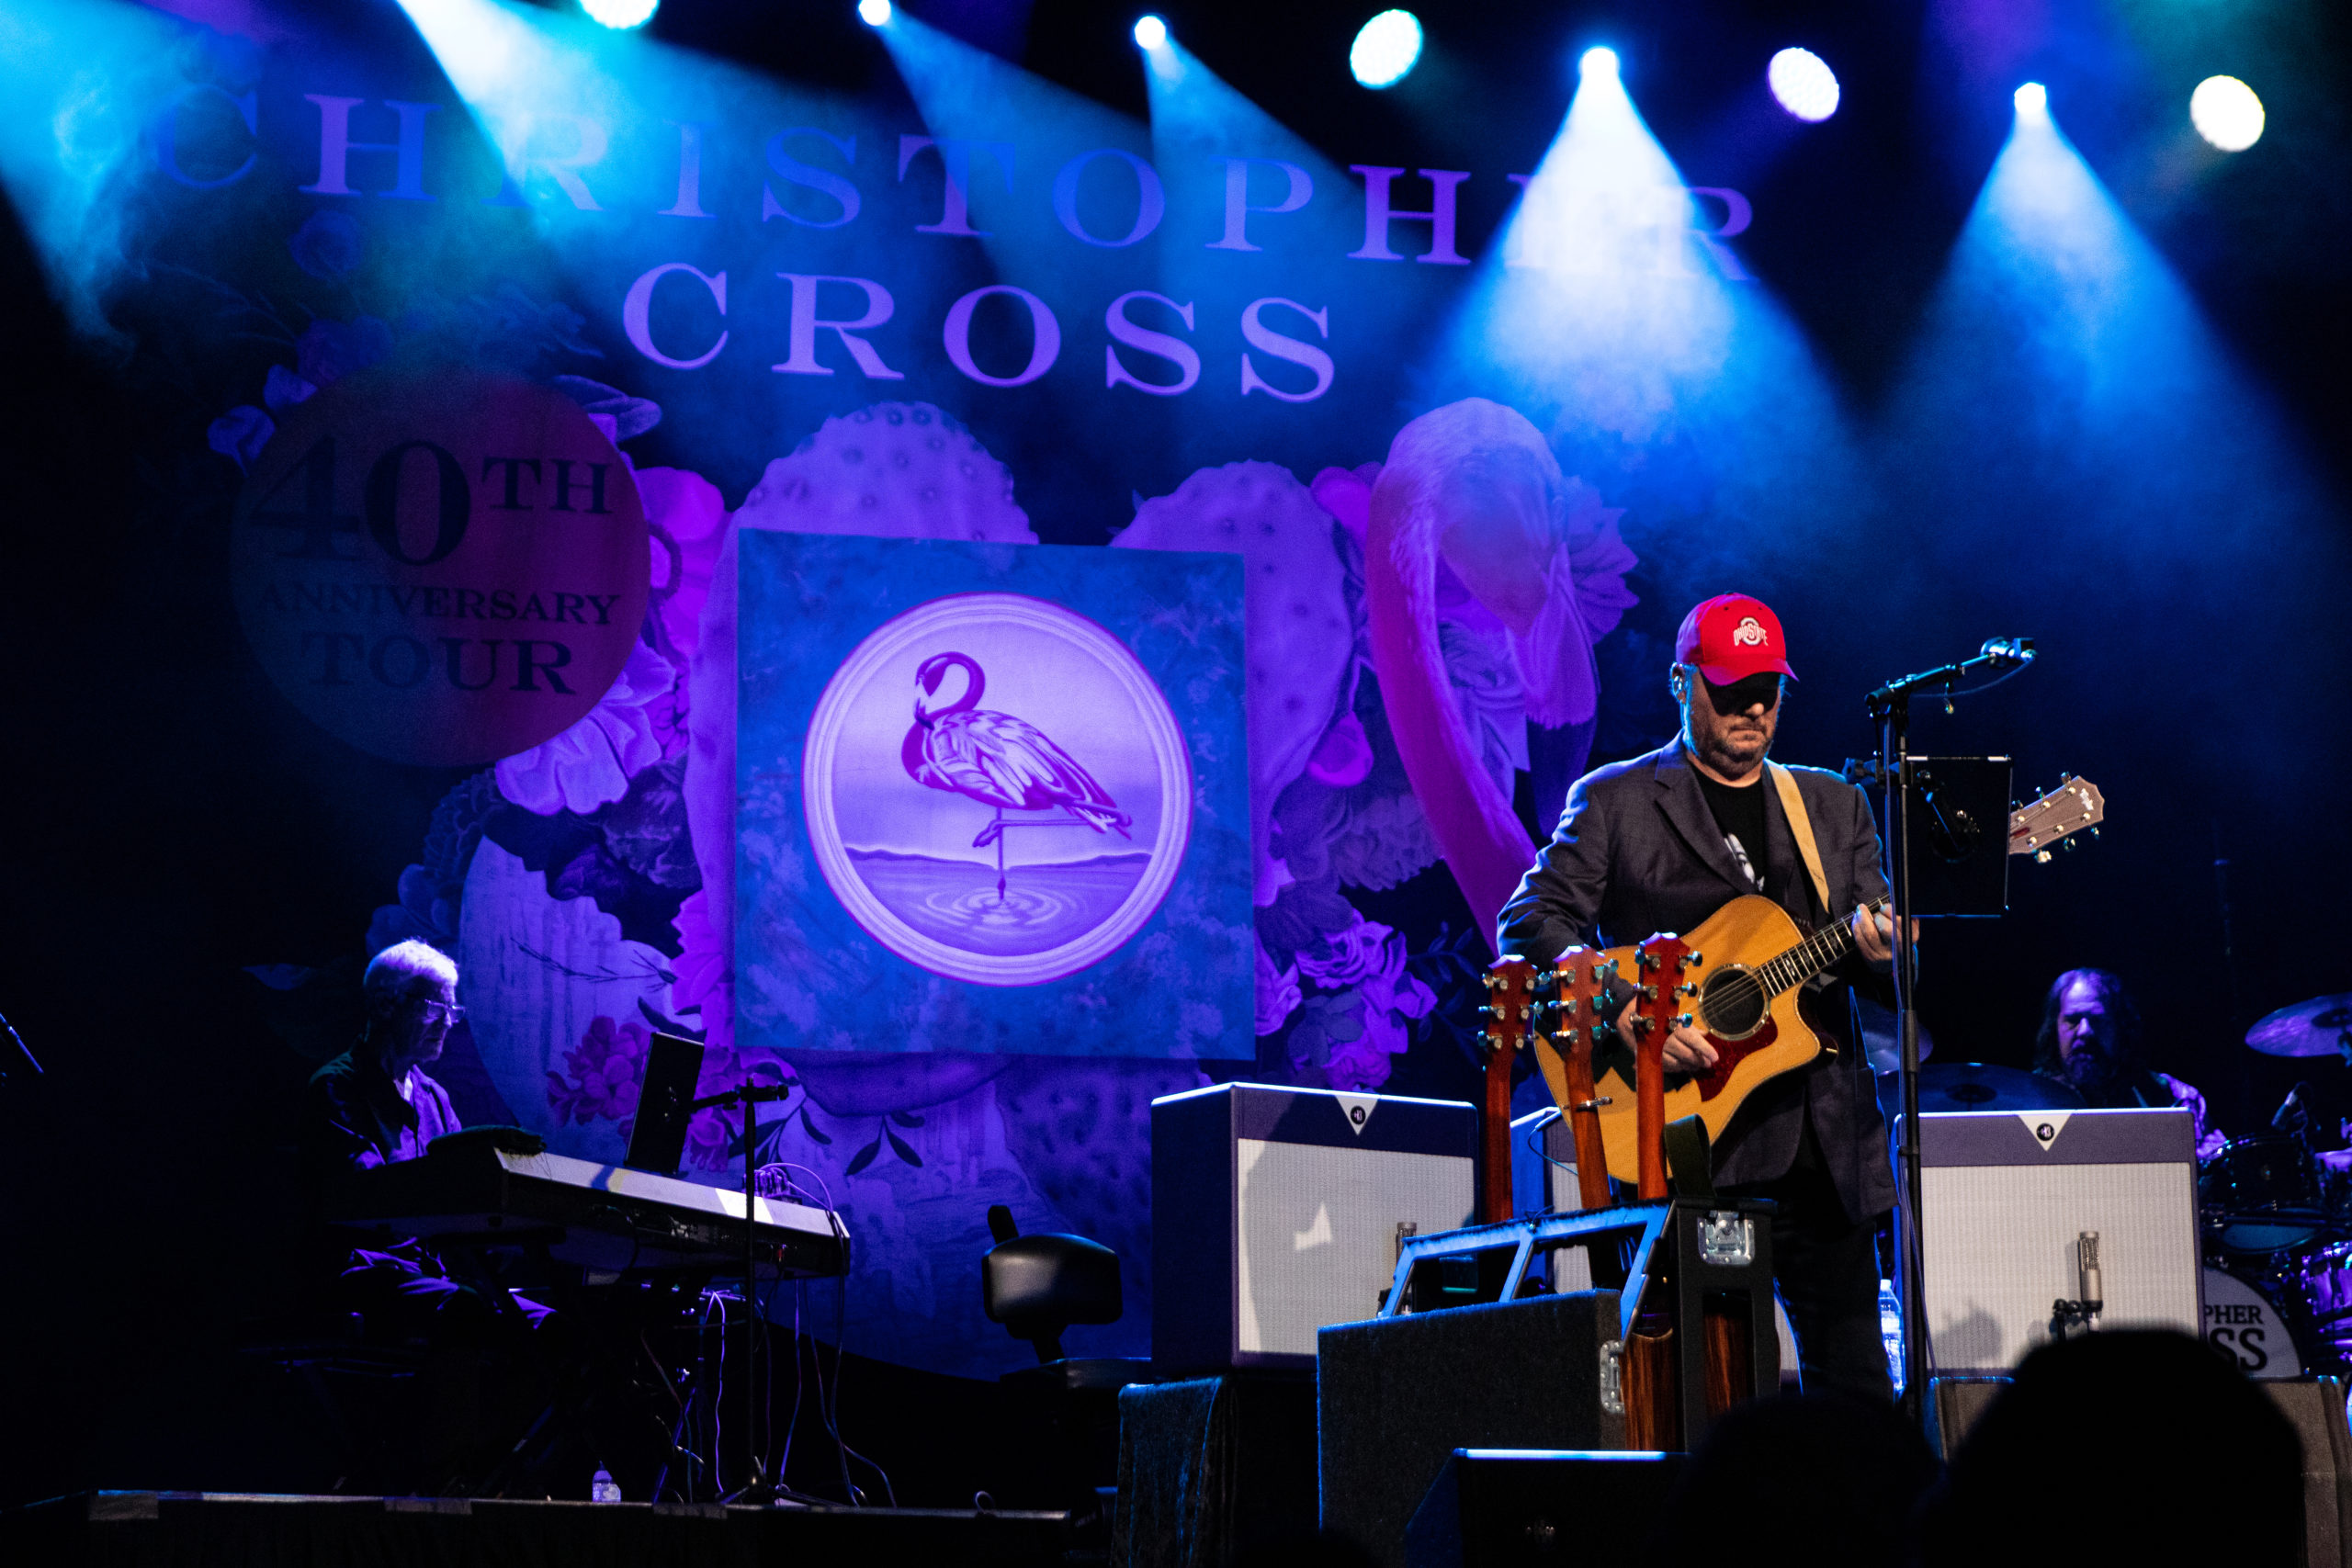 LEGEND CHRISTOPHER CROSS BRINGS HIS 40TH ANNIVERSARY TOUR TO ROBINS THEATRE